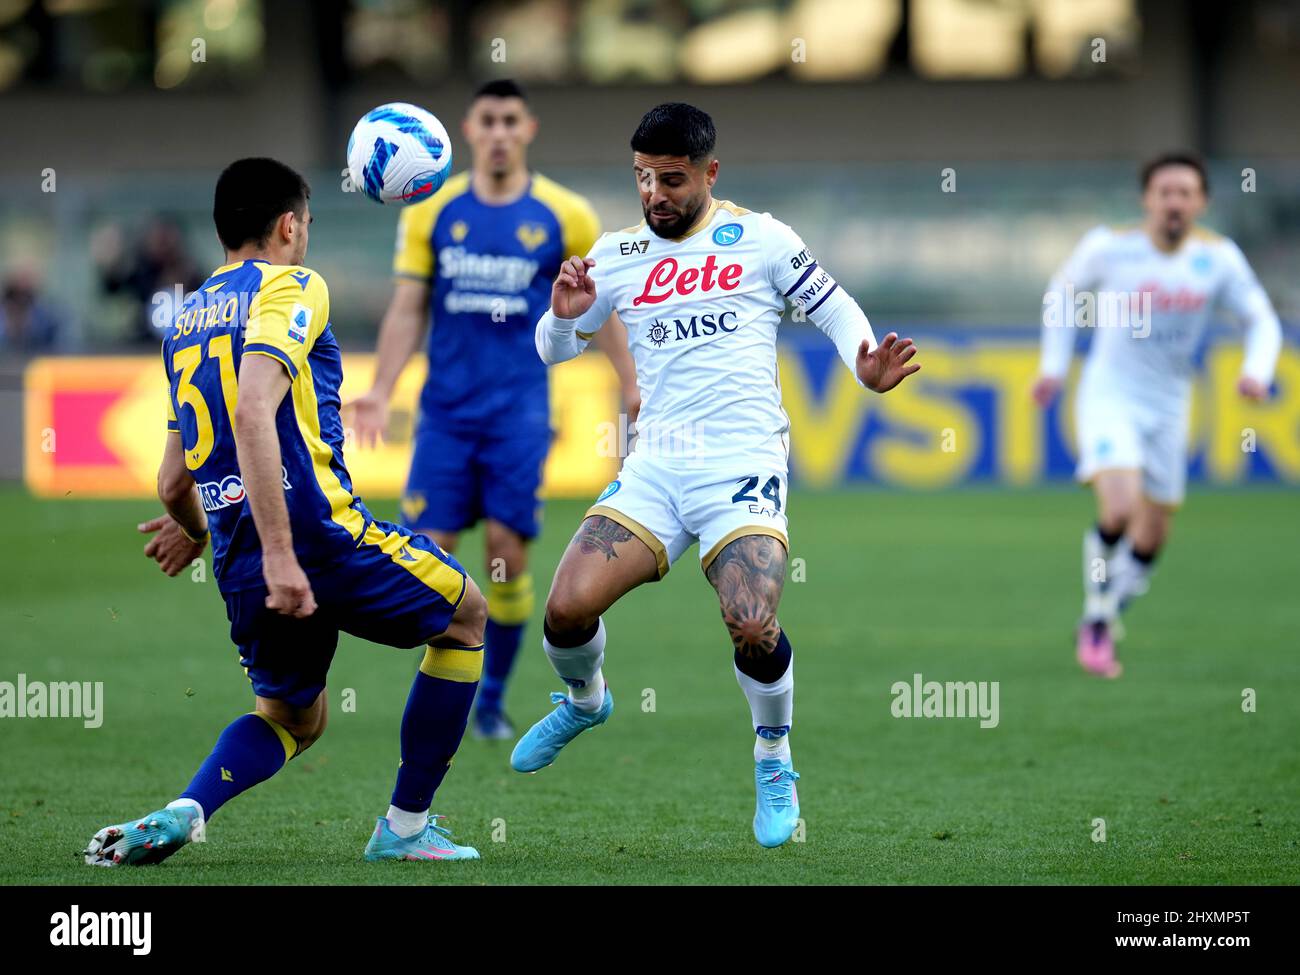 VERONA, ITALY - MARCH 13: Lorenzo Insigne of SSc Napoli competes for the ball with Bosko Sutalo of Hellas Verona ,during the Serie A match between Hellas and SSC Napoli at Stadio Marcantonio Bentegodi on March 13, 2022 in Verona, Italy. (Photo by MB Media) Stock Photo